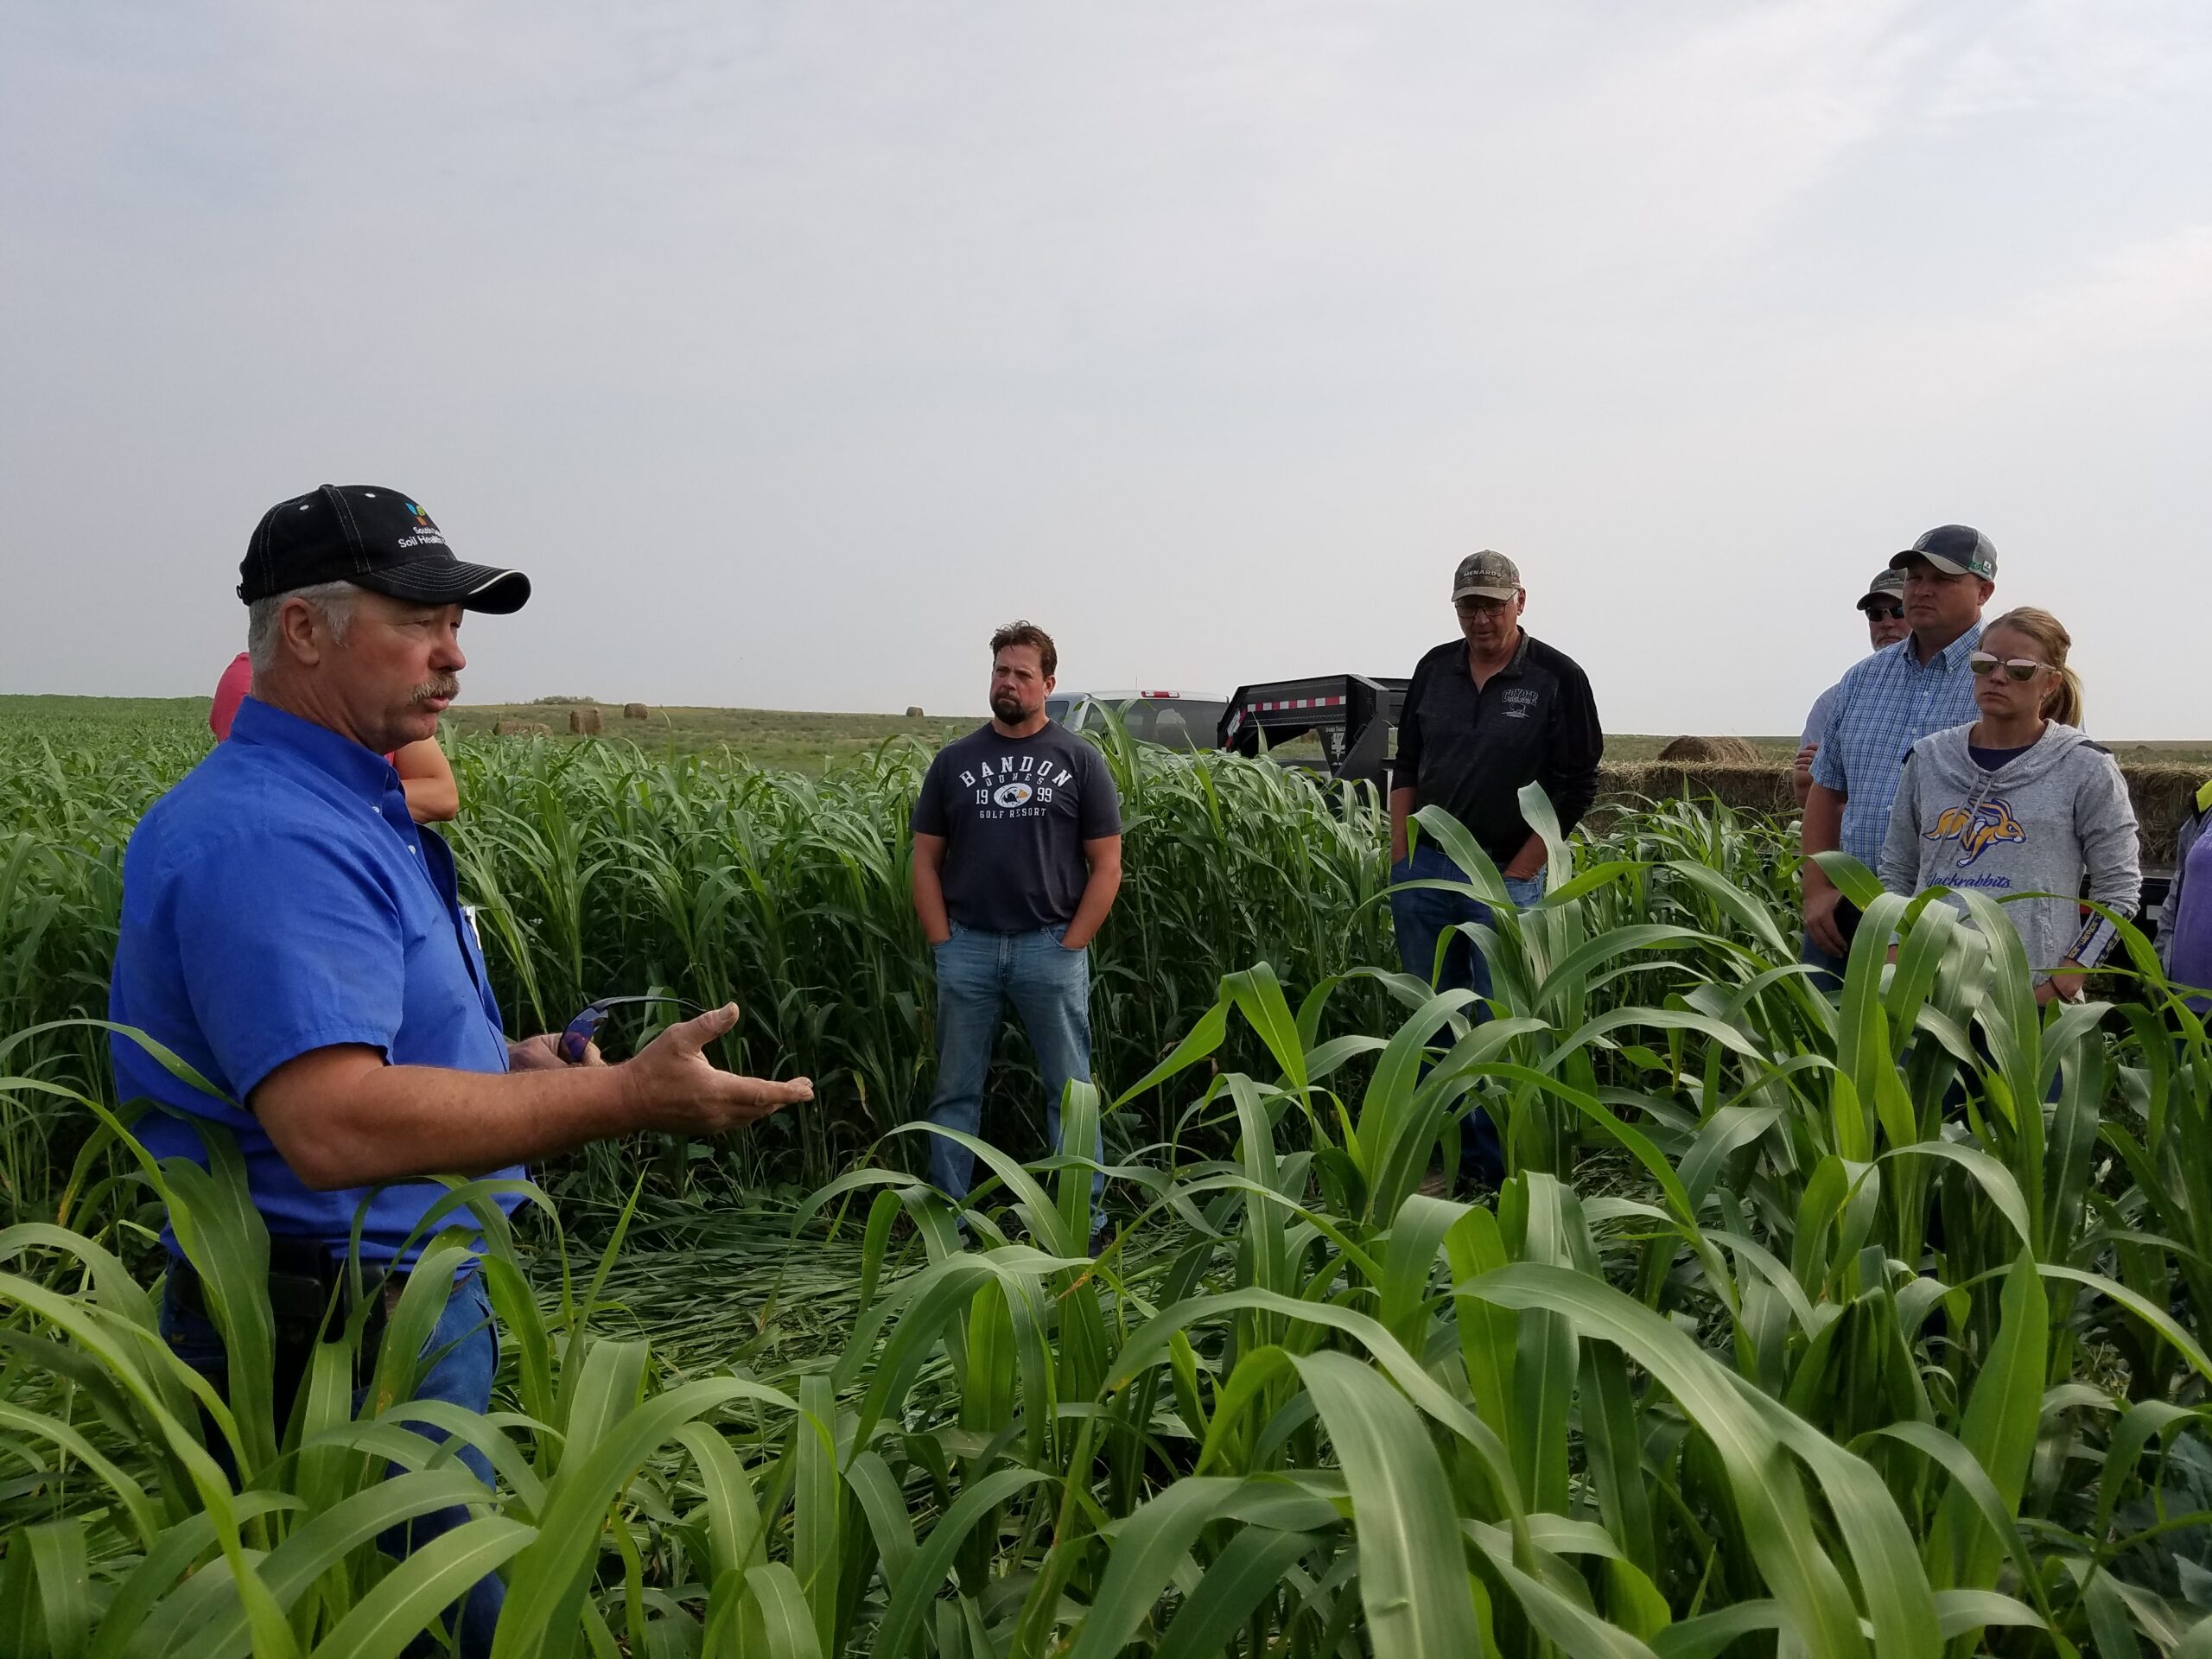 Doug Sieck, wearing a blue shirt and black cap, stands in a cover crop field speaking to several adult listeners. The cover crop is chest high.